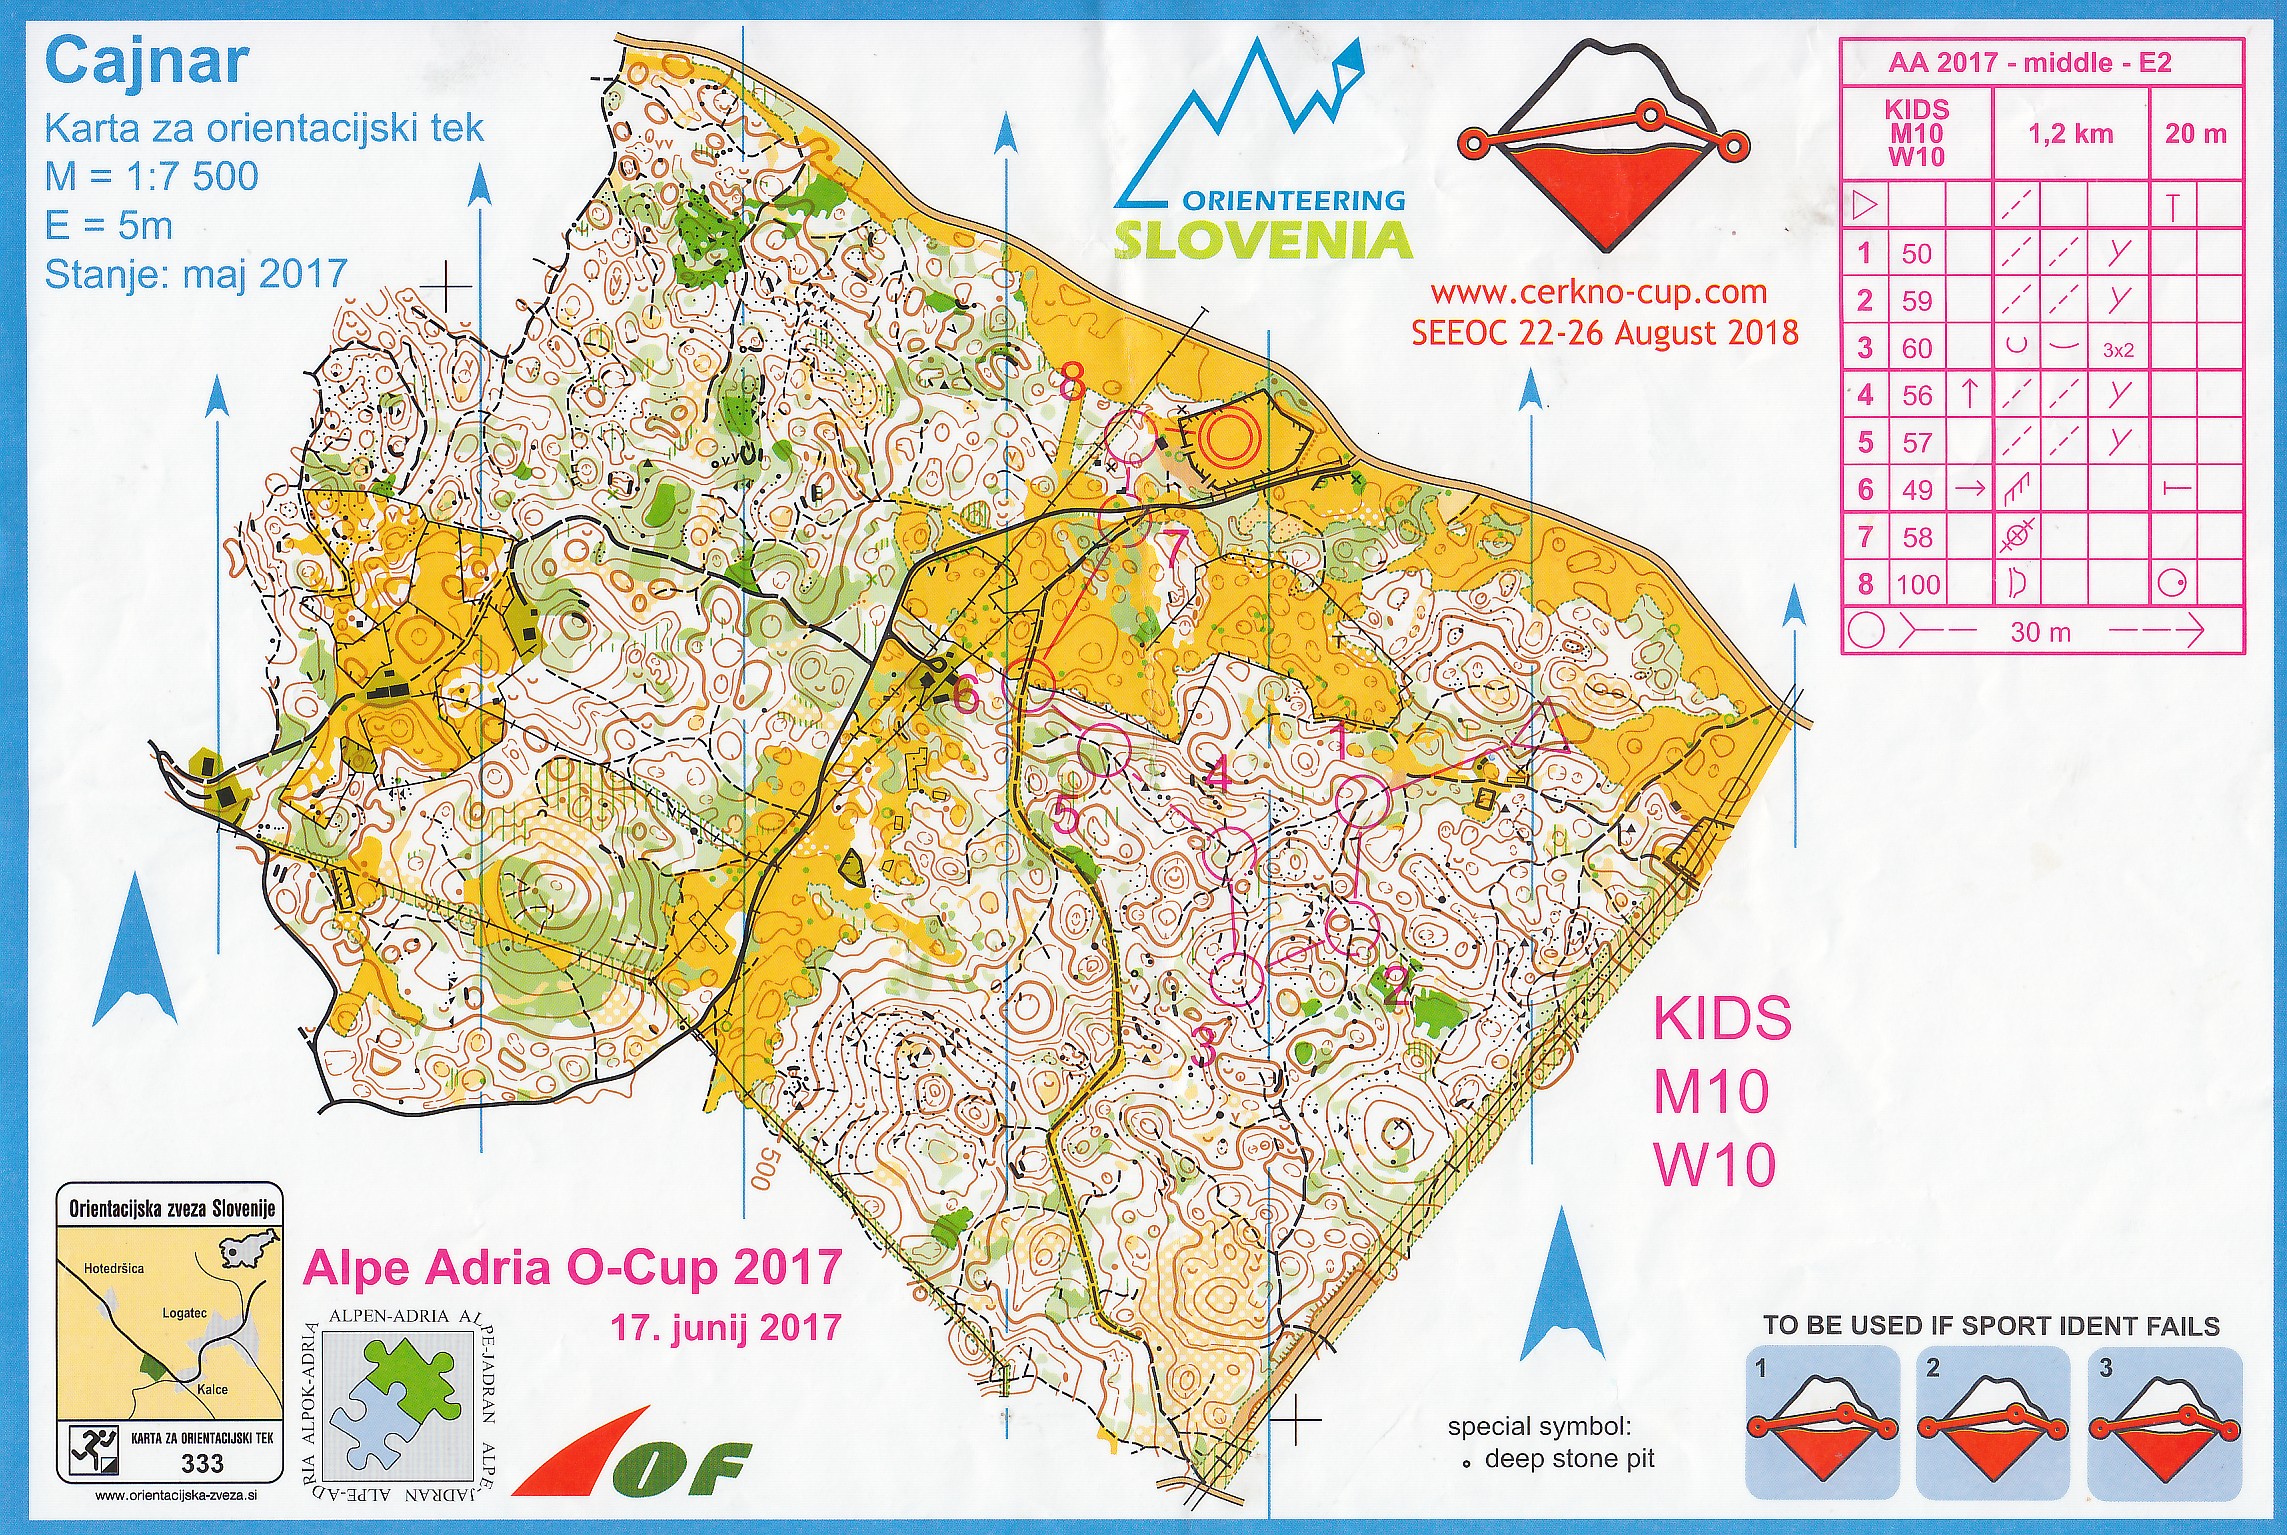 Alpe Adria Orienteering Cup 2017 - Middle (2017-06-17)